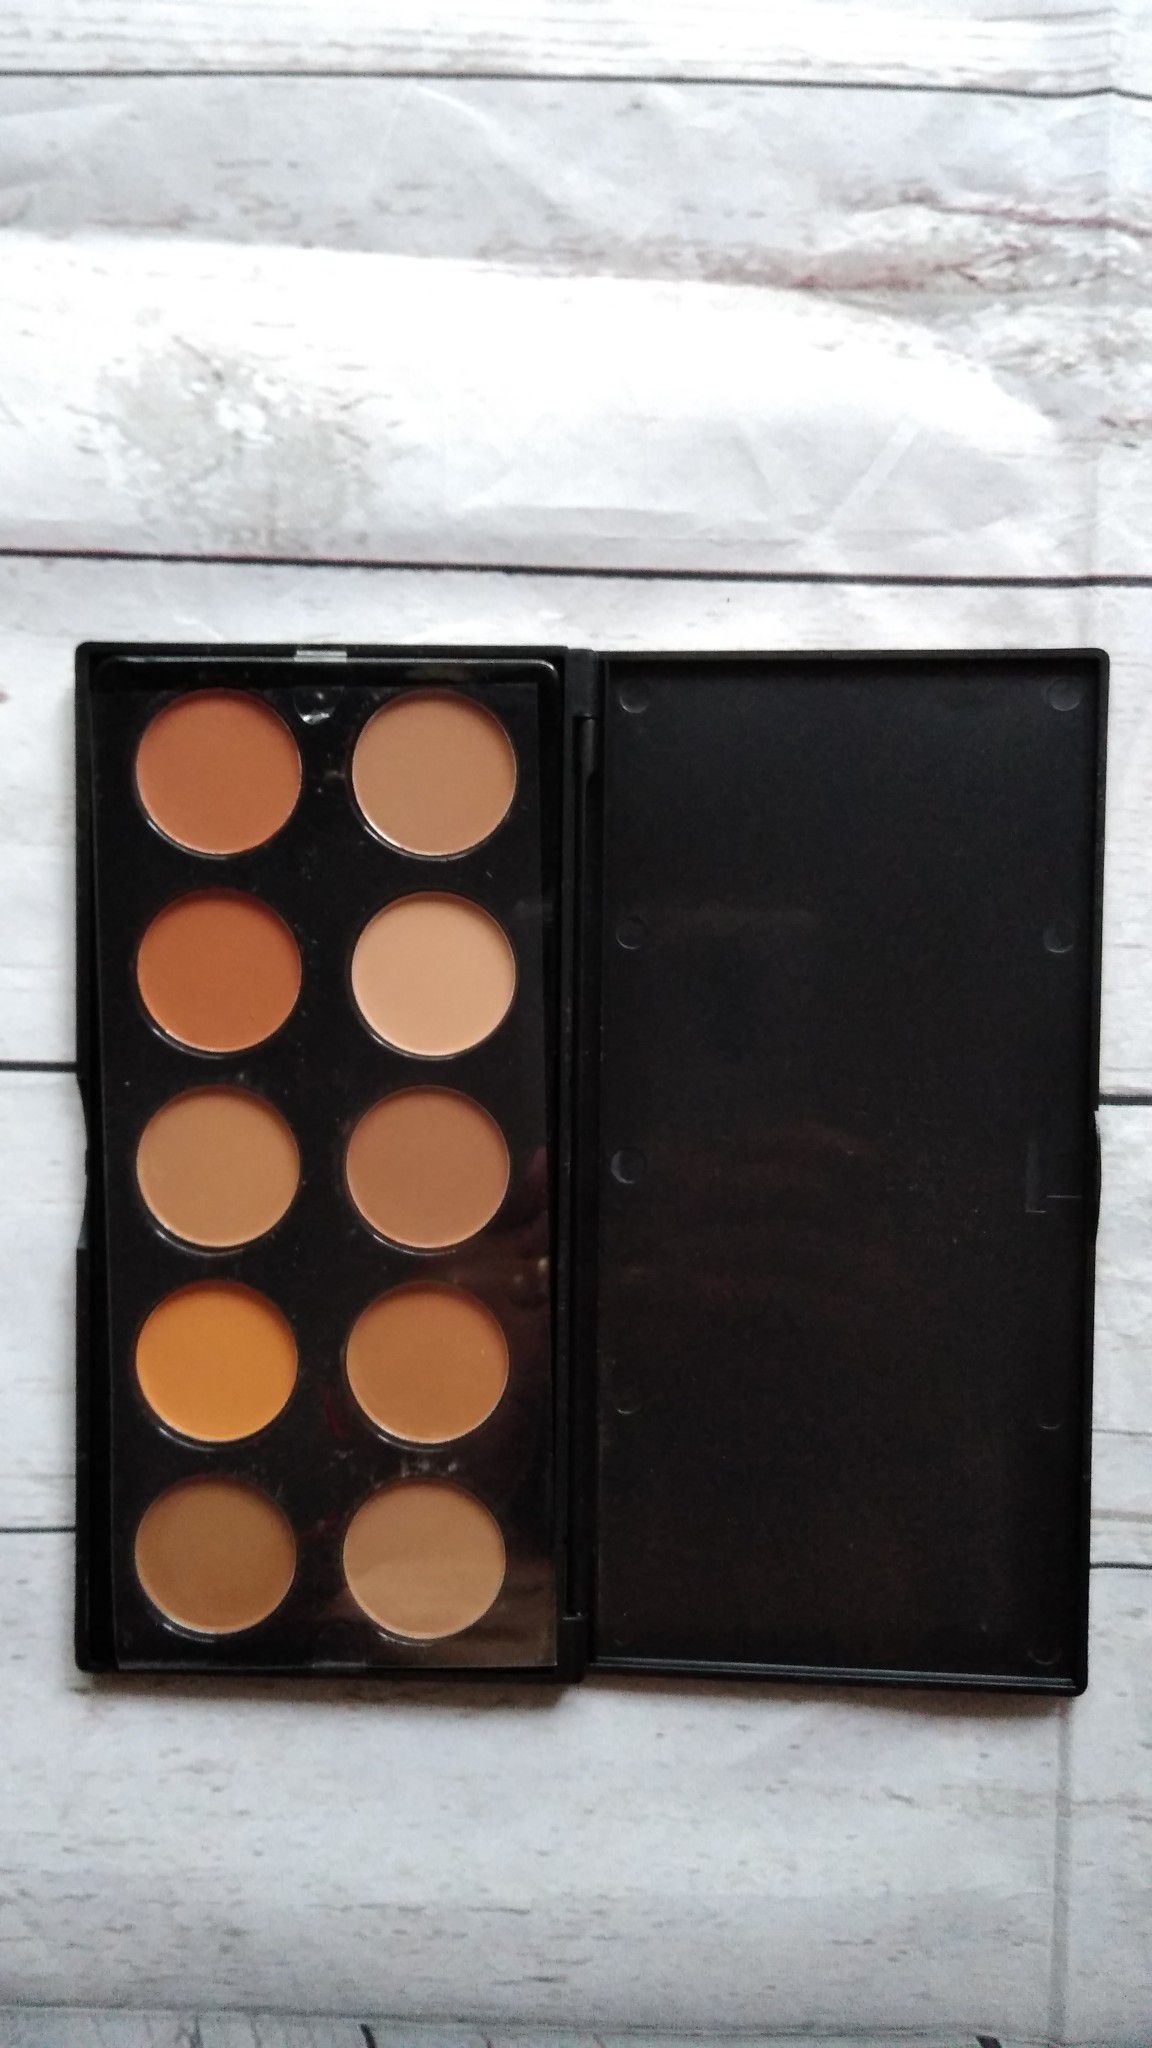 Brand New ProArtist Bronzer Palette Makeup. ( Never used )